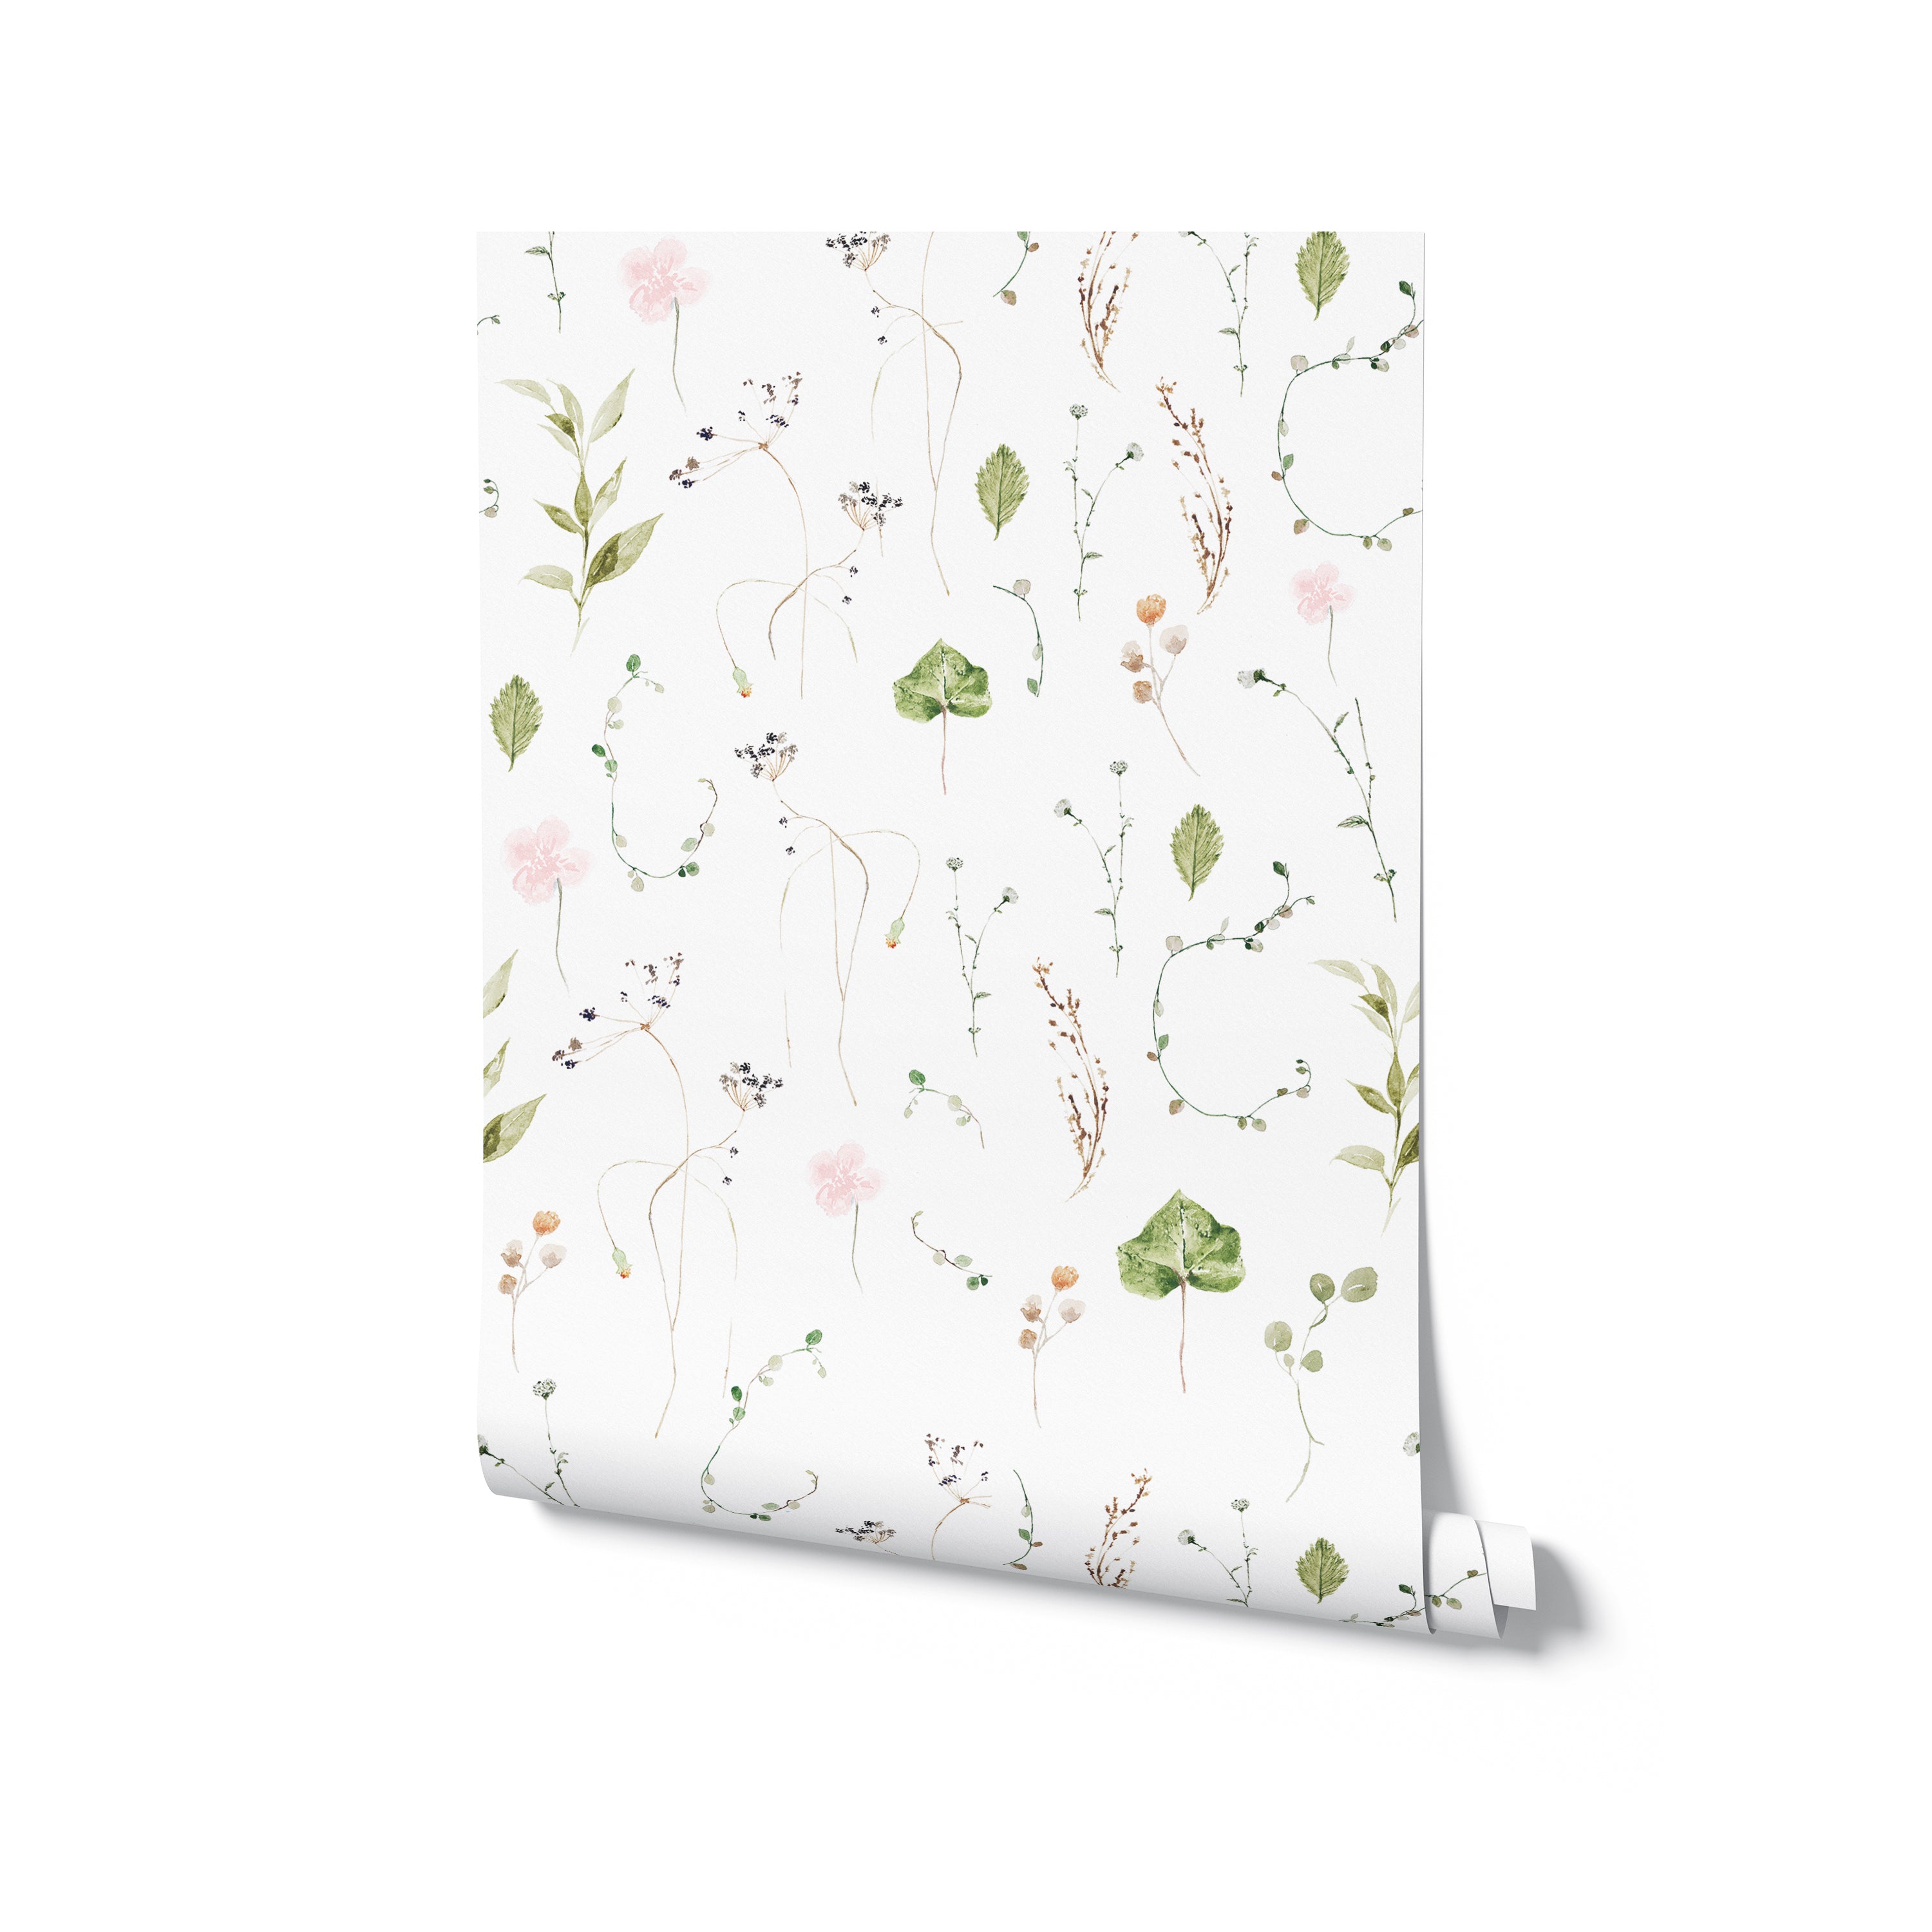 An image of the rolled Watercolour Floral Wallpaper in Blush Pink, revealing the subtle and soft design of the paper. The wallpaper features a pattern of pink flowers, delicate green leaves, and thin branches, all rendered in a gentle watercolor style that gives the impression of a hand-painted artwork. This wallpaper roll is indicative of the light and airy feel the pattern will bring to a space when applied to a wall.